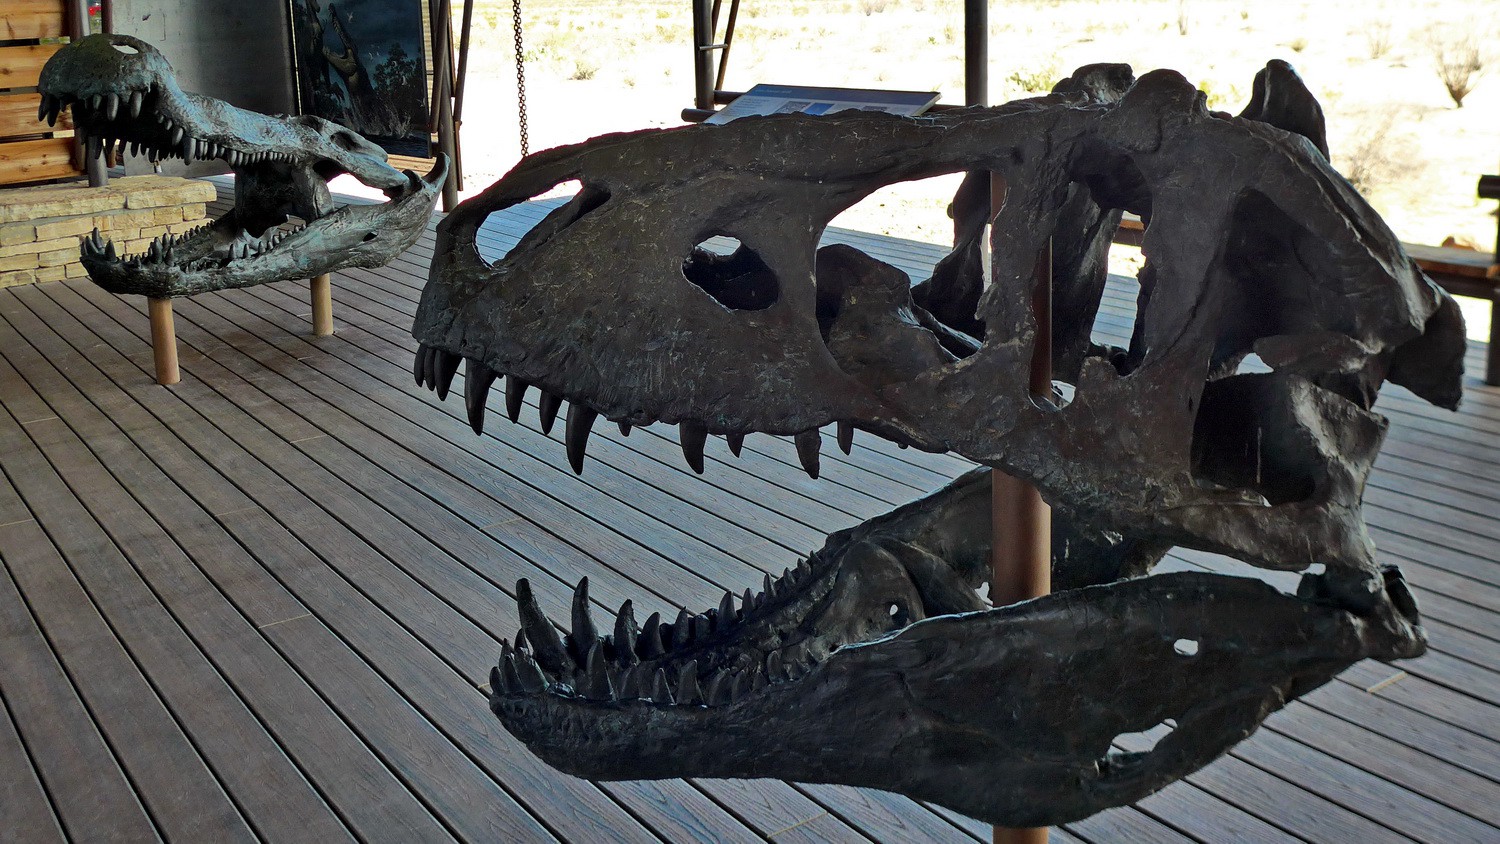 Head of a Tyrannosaurus (up to 12 meters long and 7,300 kg) and a giant Crocodile (up to 12 meters long, too)